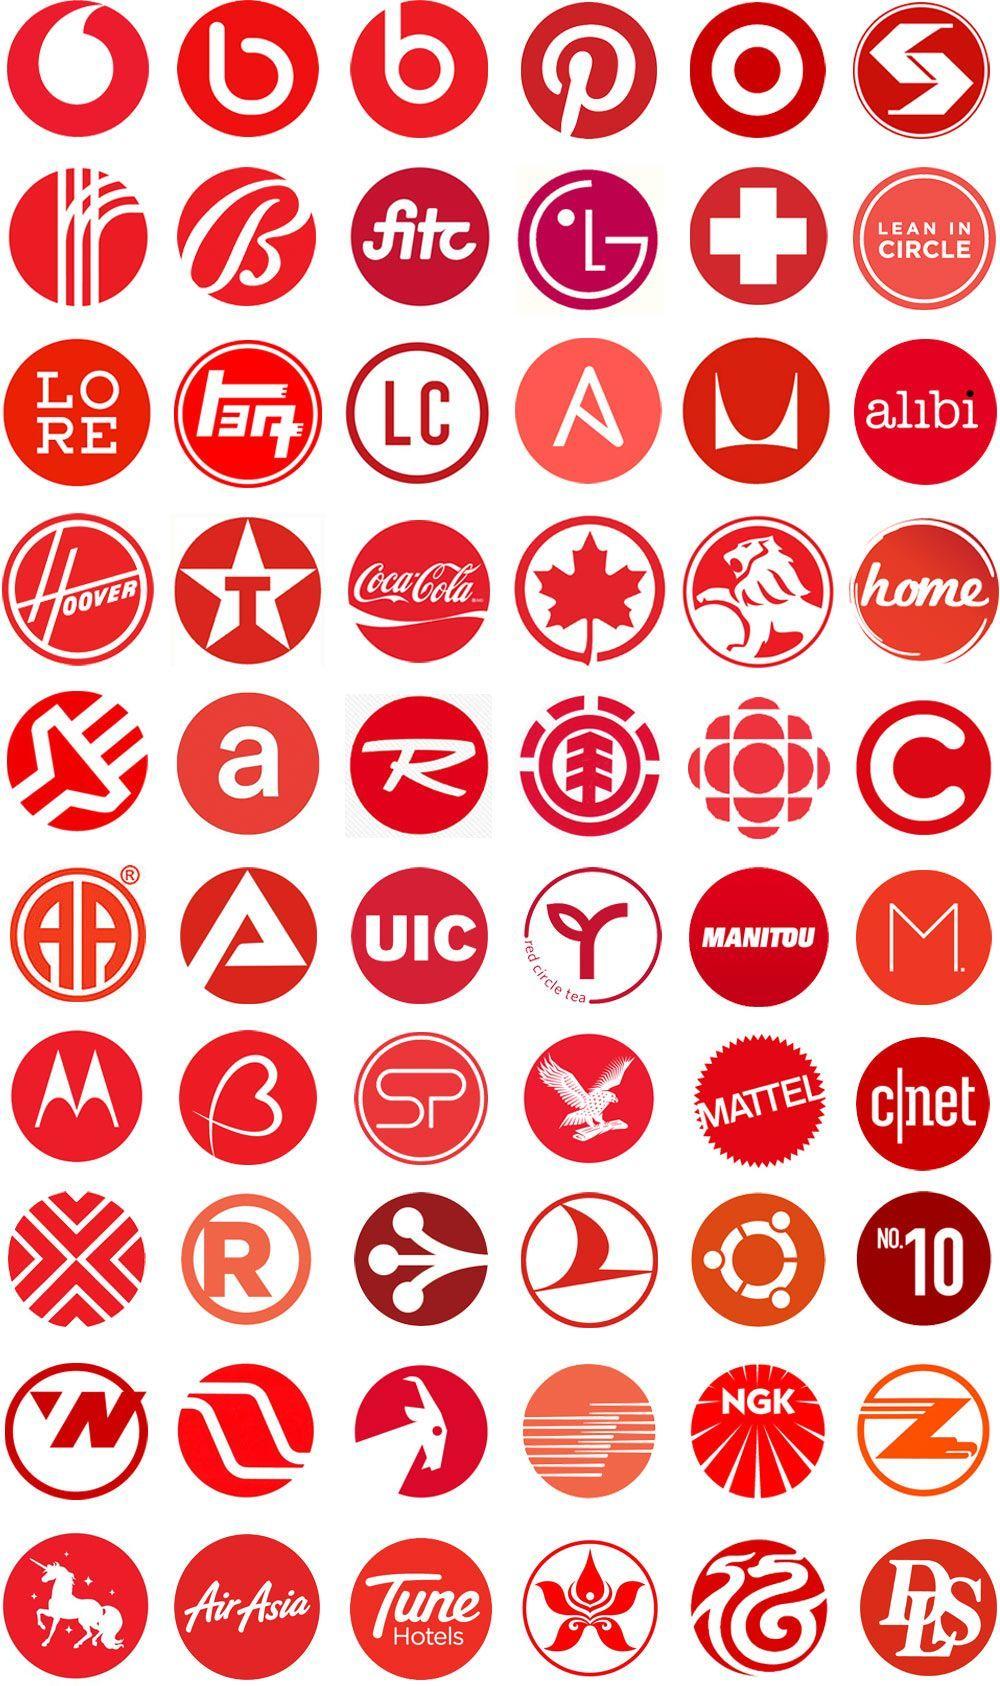 Letter R Red Circle Logo - Red Background White Letter R Logos And Symbols